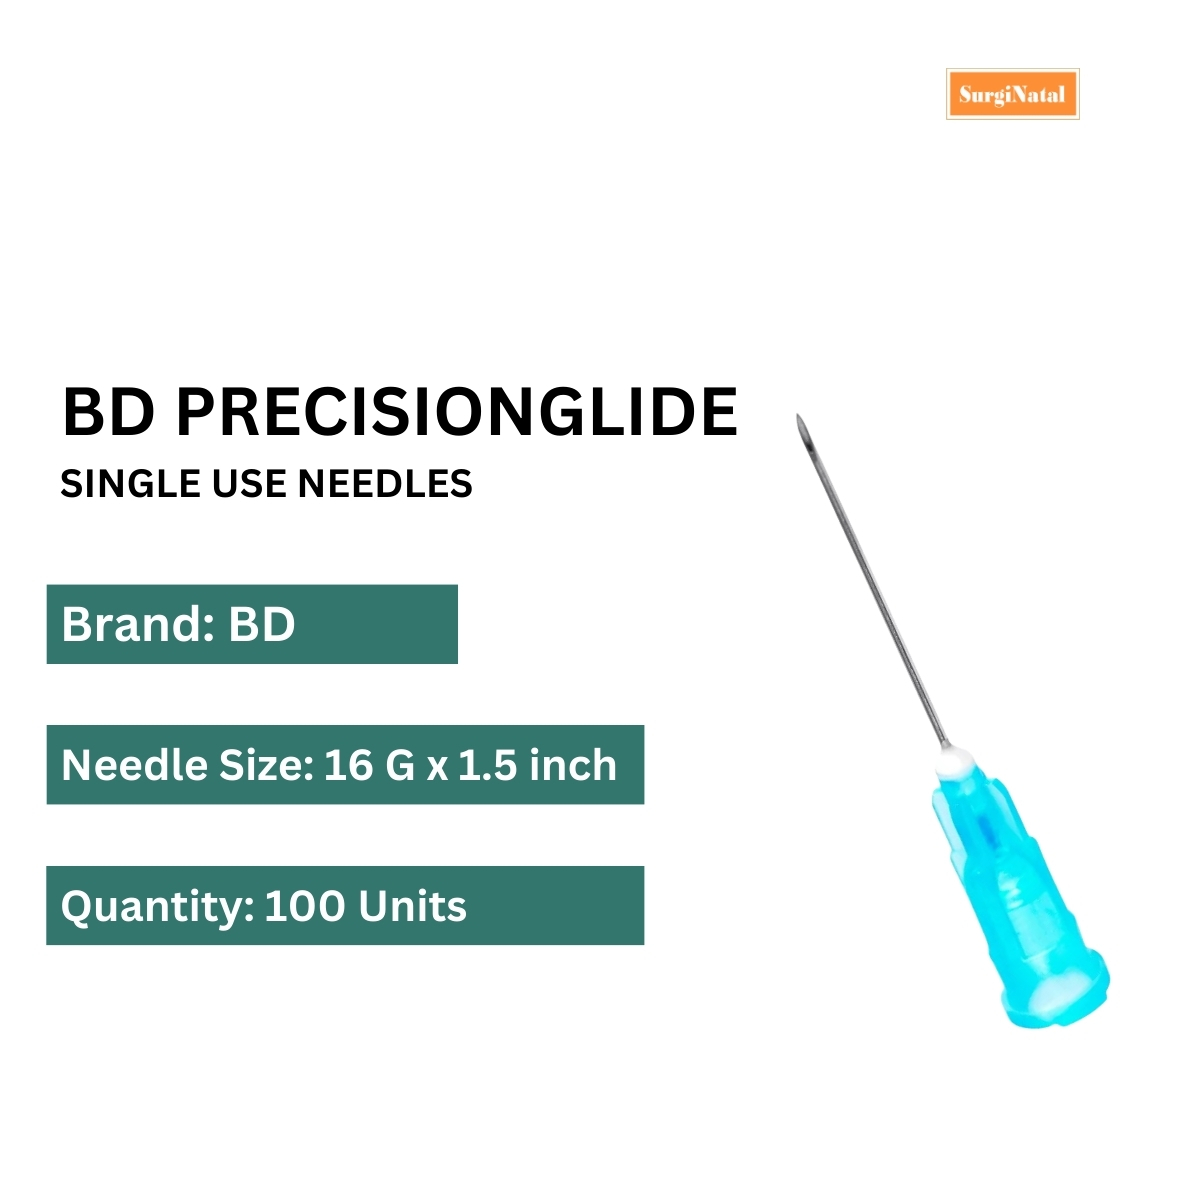 bd needles precisionglide 16g*1.5 inch - 100 units pack